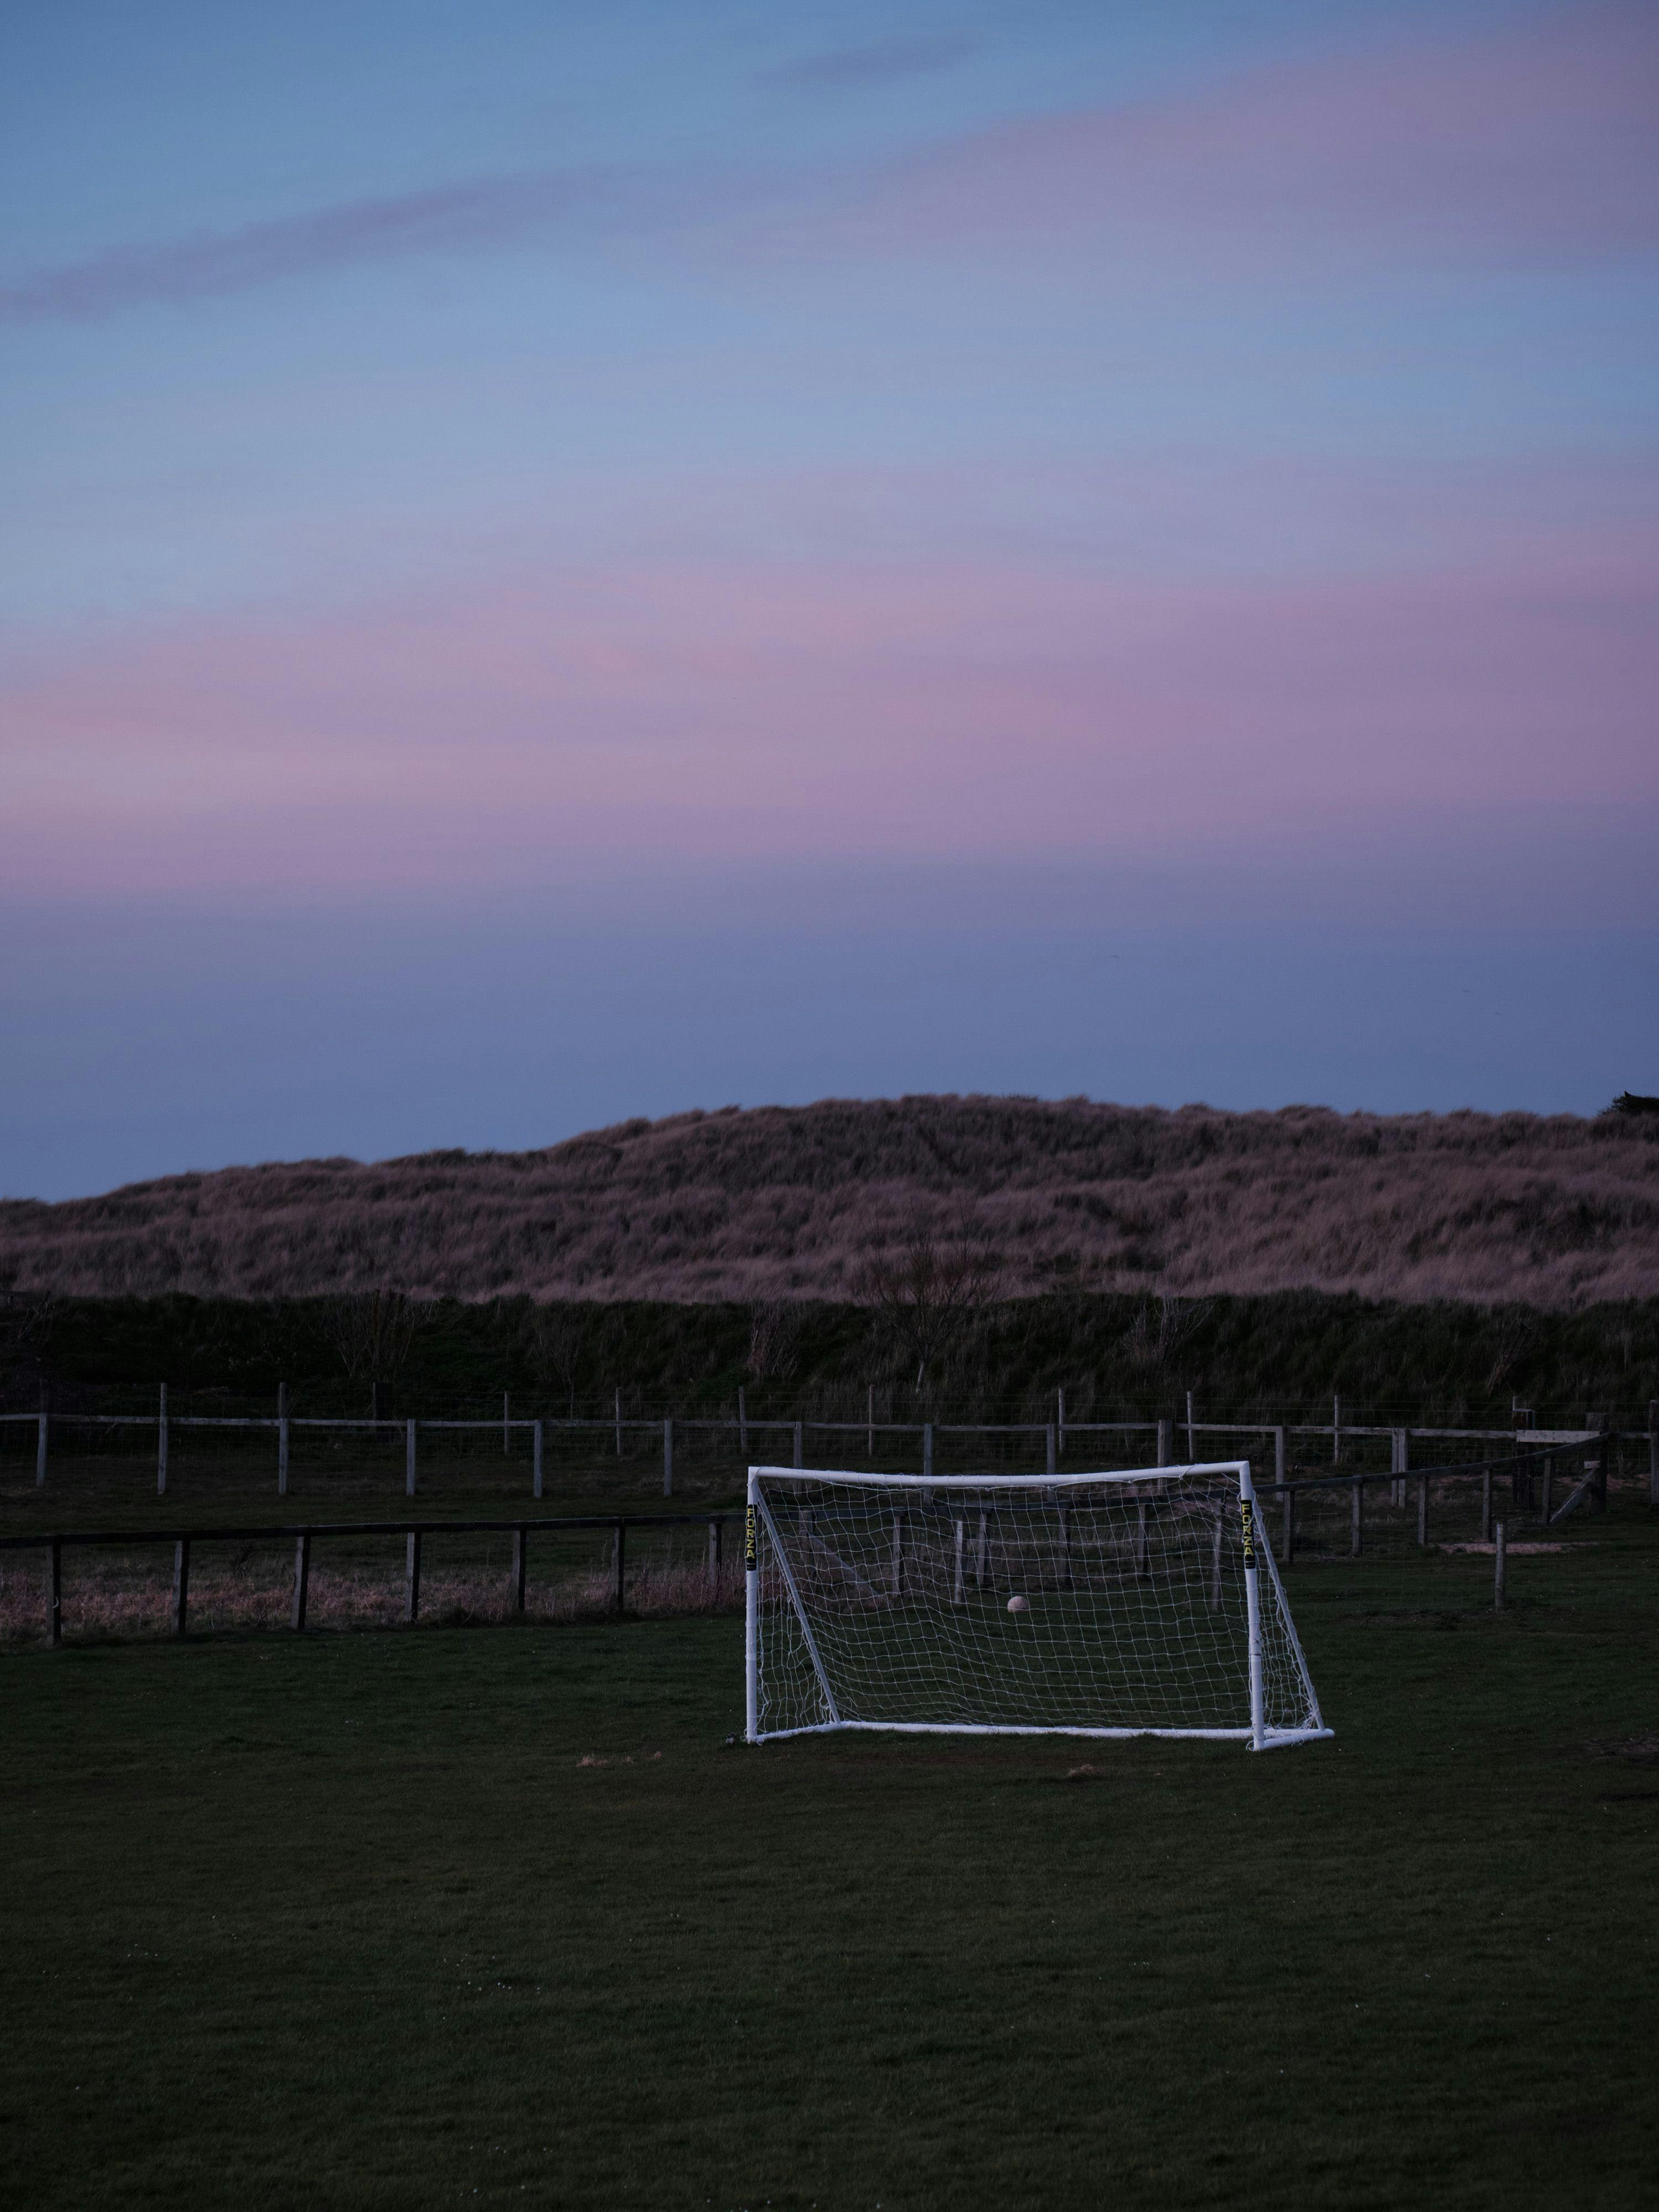 A football net in a field against the dunes, the sky has gone pink and blue as the light goes.